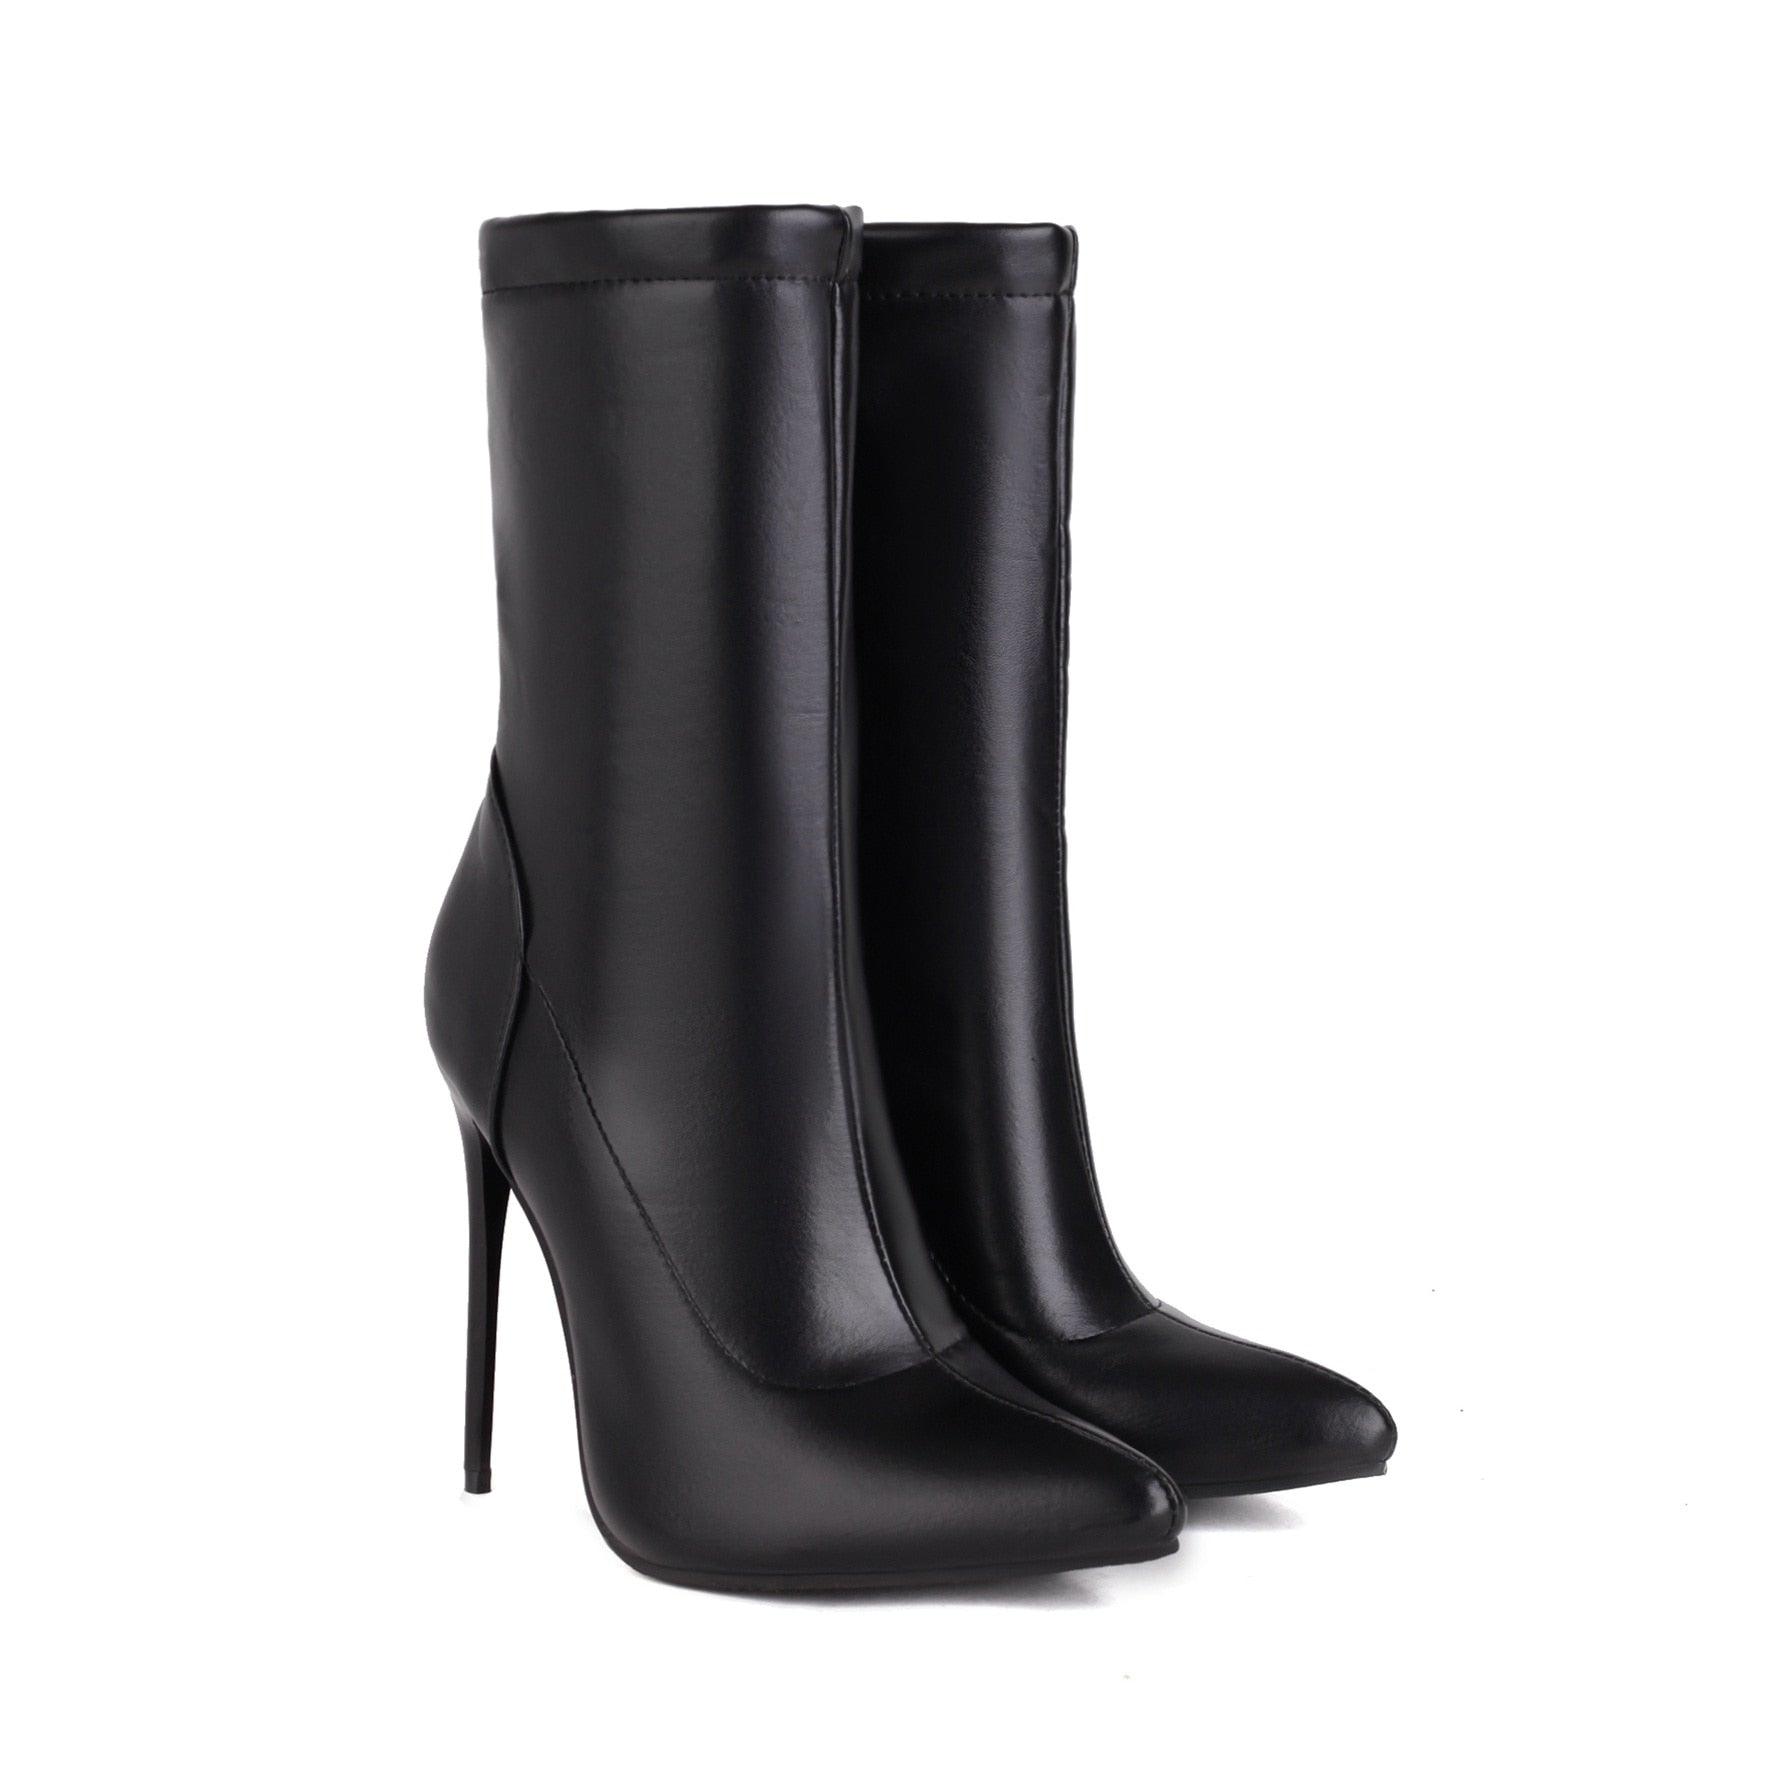 Ankle Length Boots - Buy Ankle Length Boots online in India